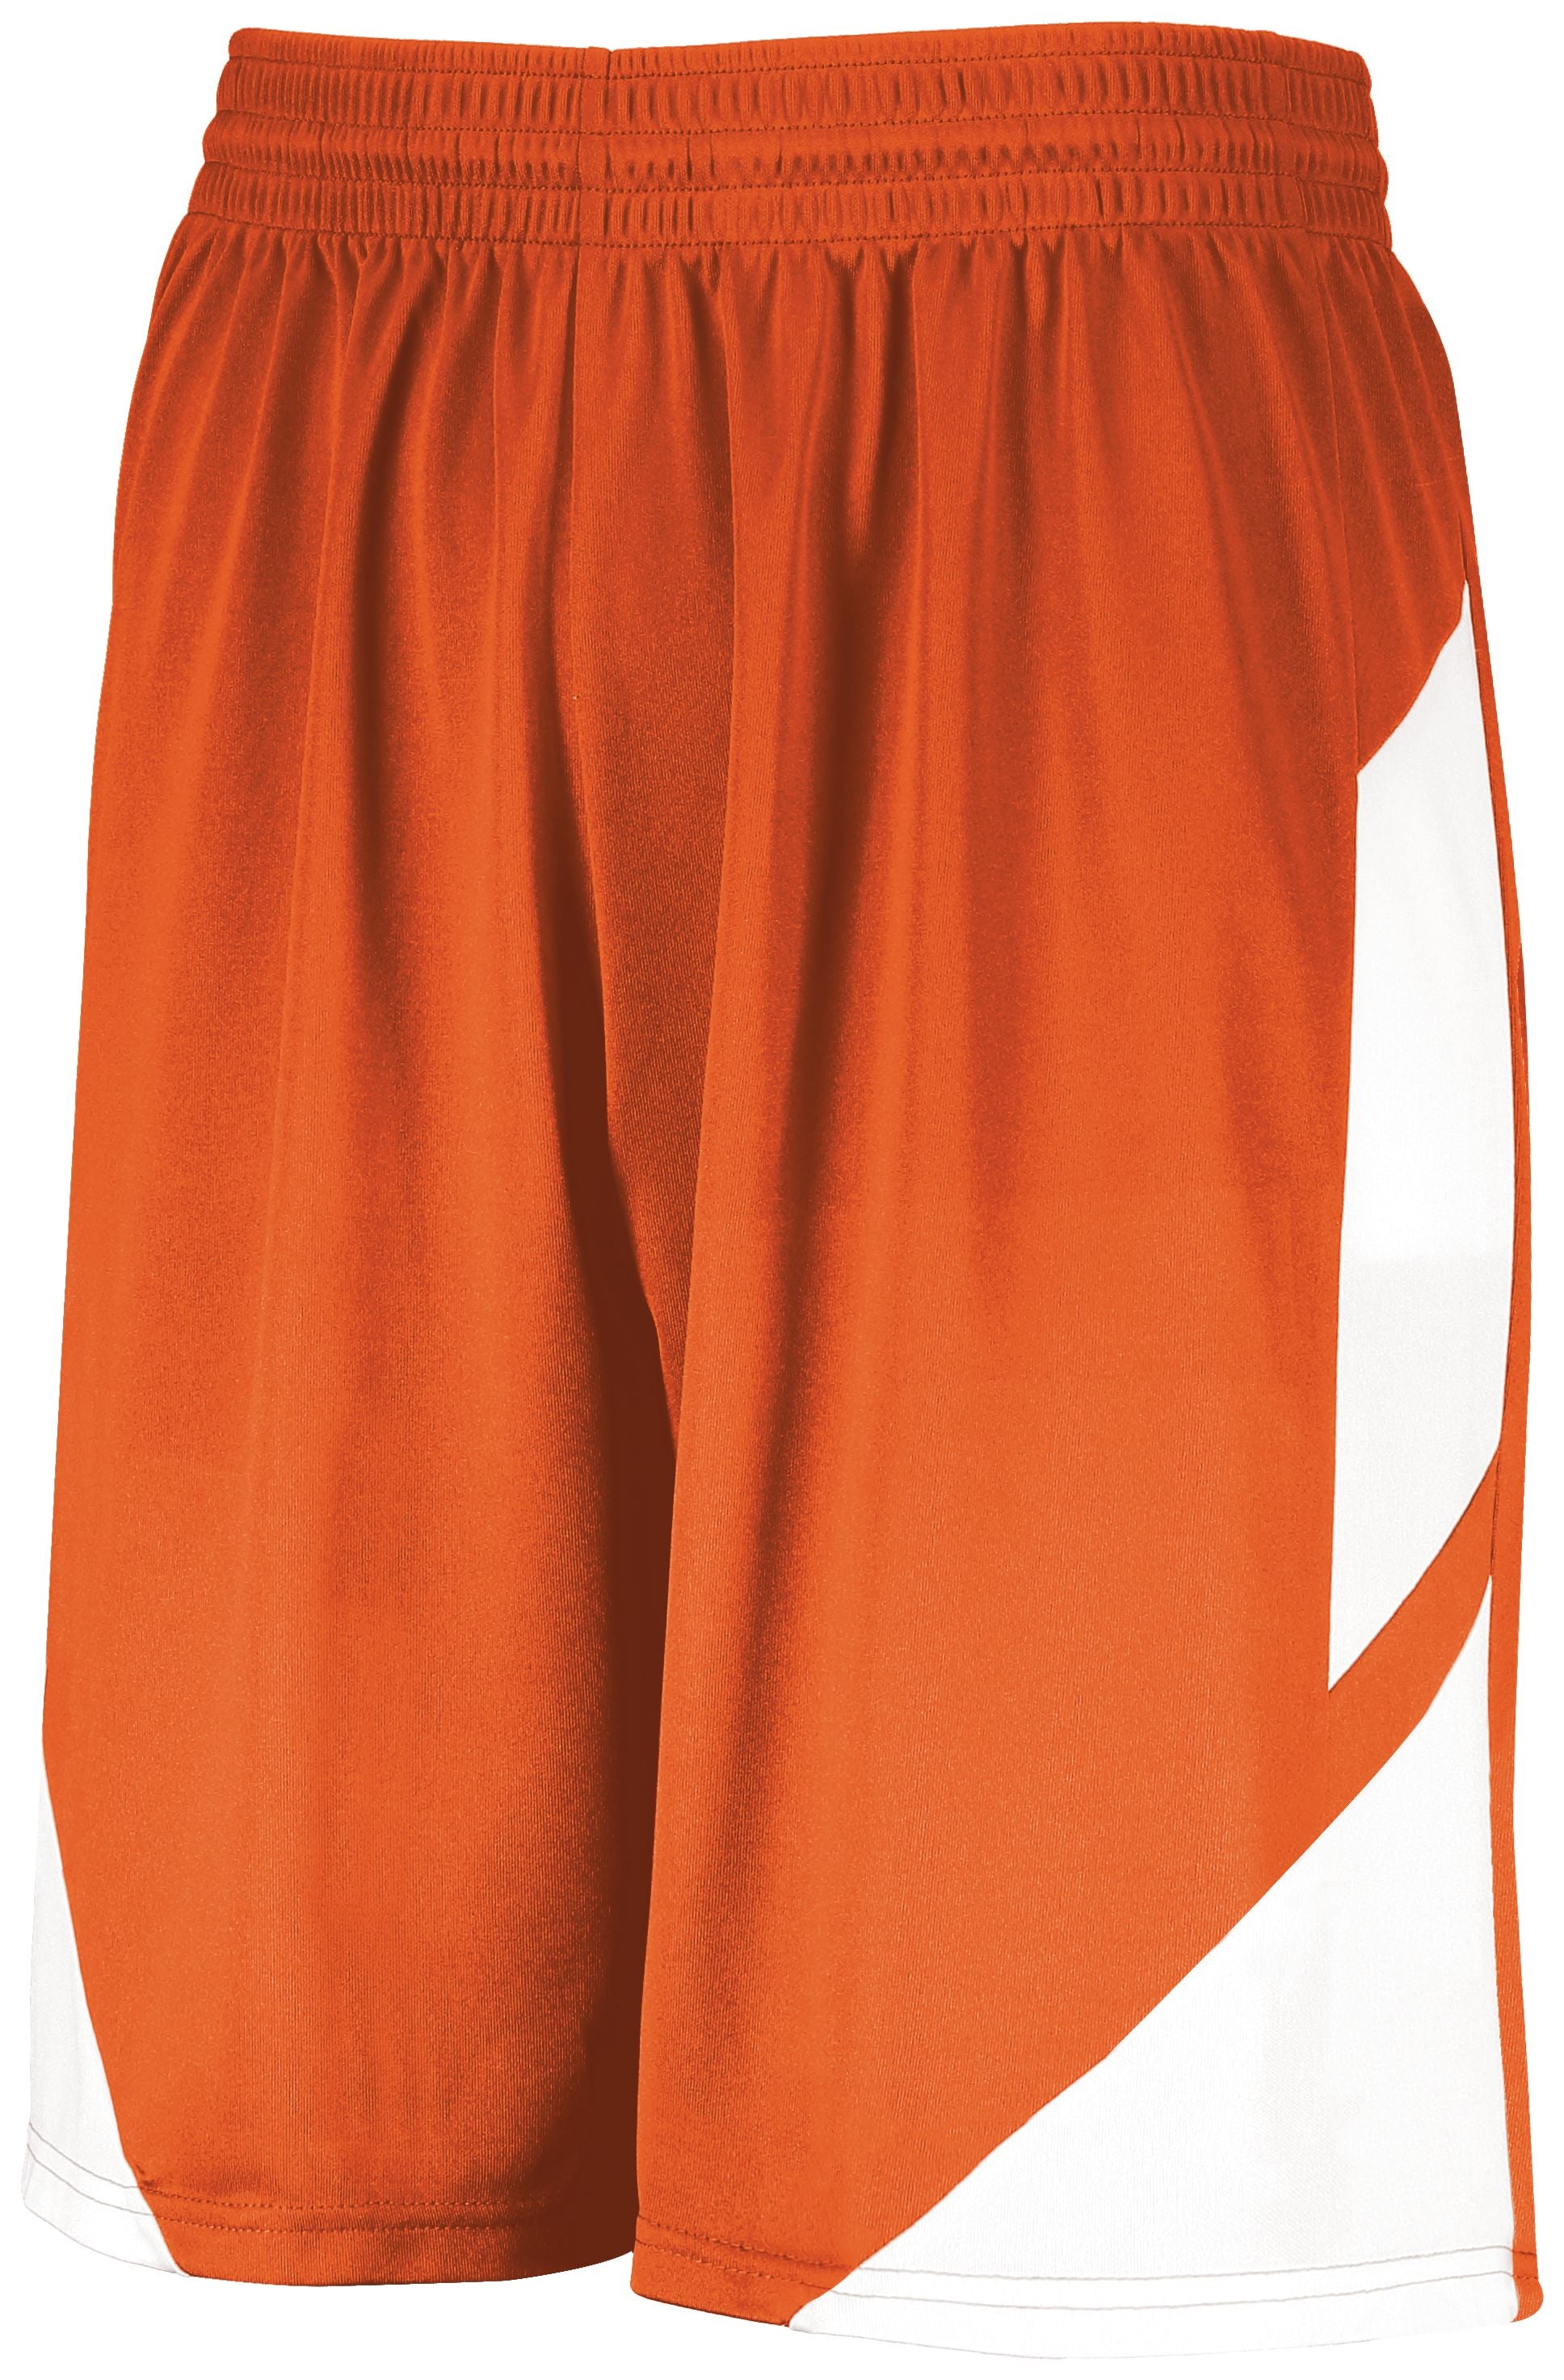 Augusta Sportswear Step-Back Basketball Shorts in Orange/White  -Part of the Adult, Adult-Shorts, Augusta-Products, Basketball, All-Sports, All-Sports-1 product lines at KanaleyCreations.com